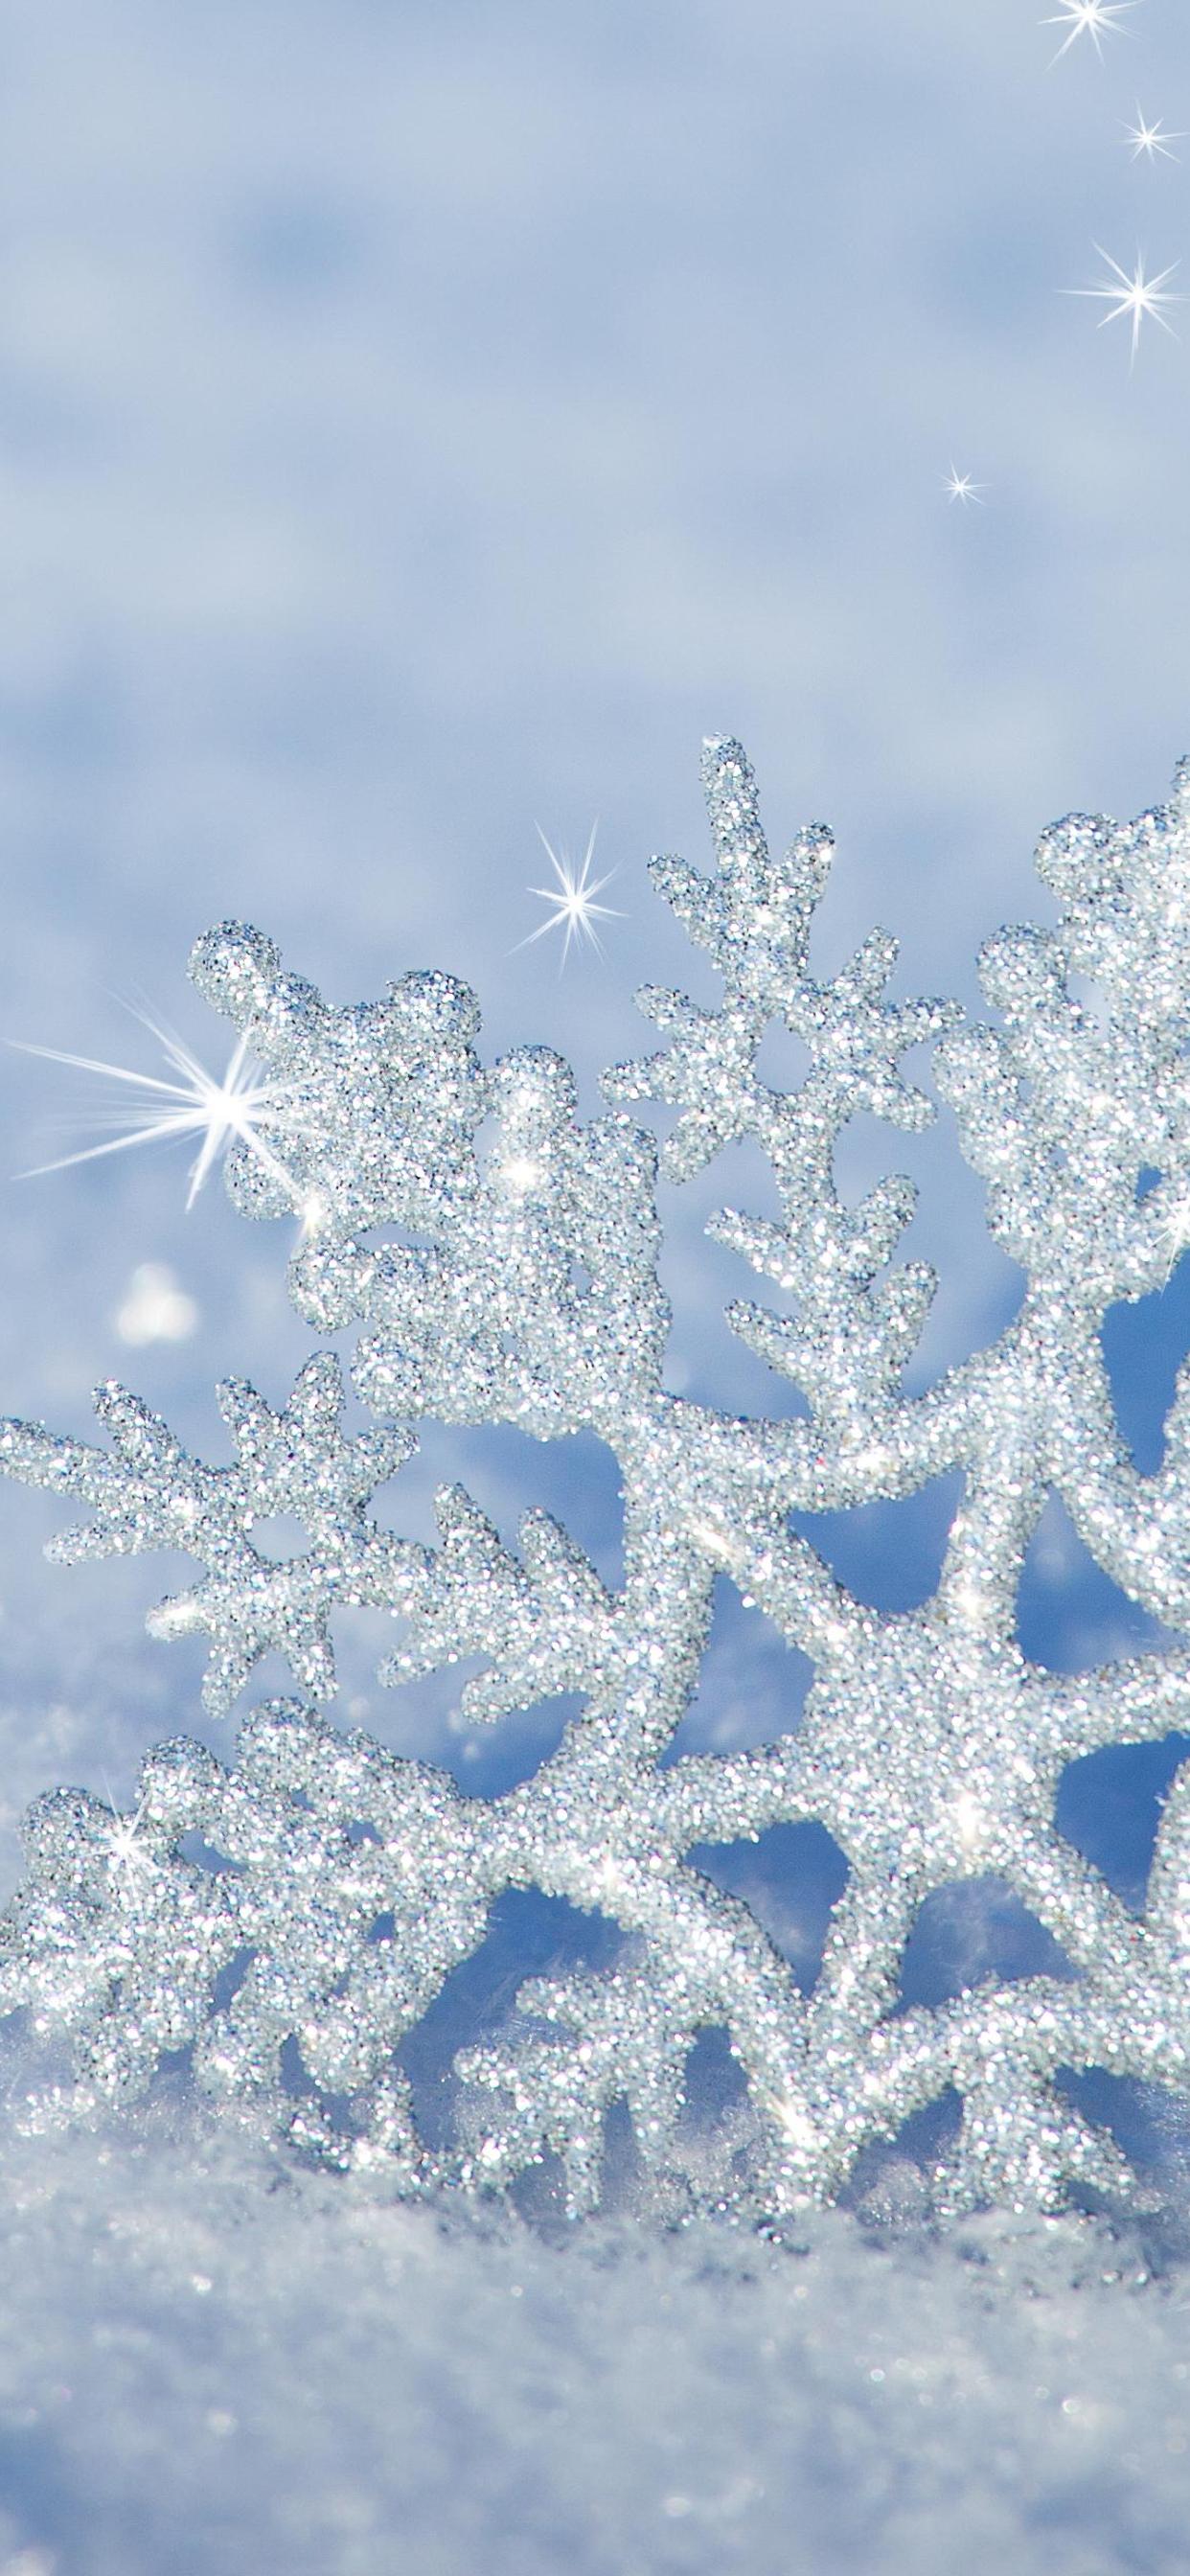 3d Snowflake In The Snow Hd Winter Wallpaper